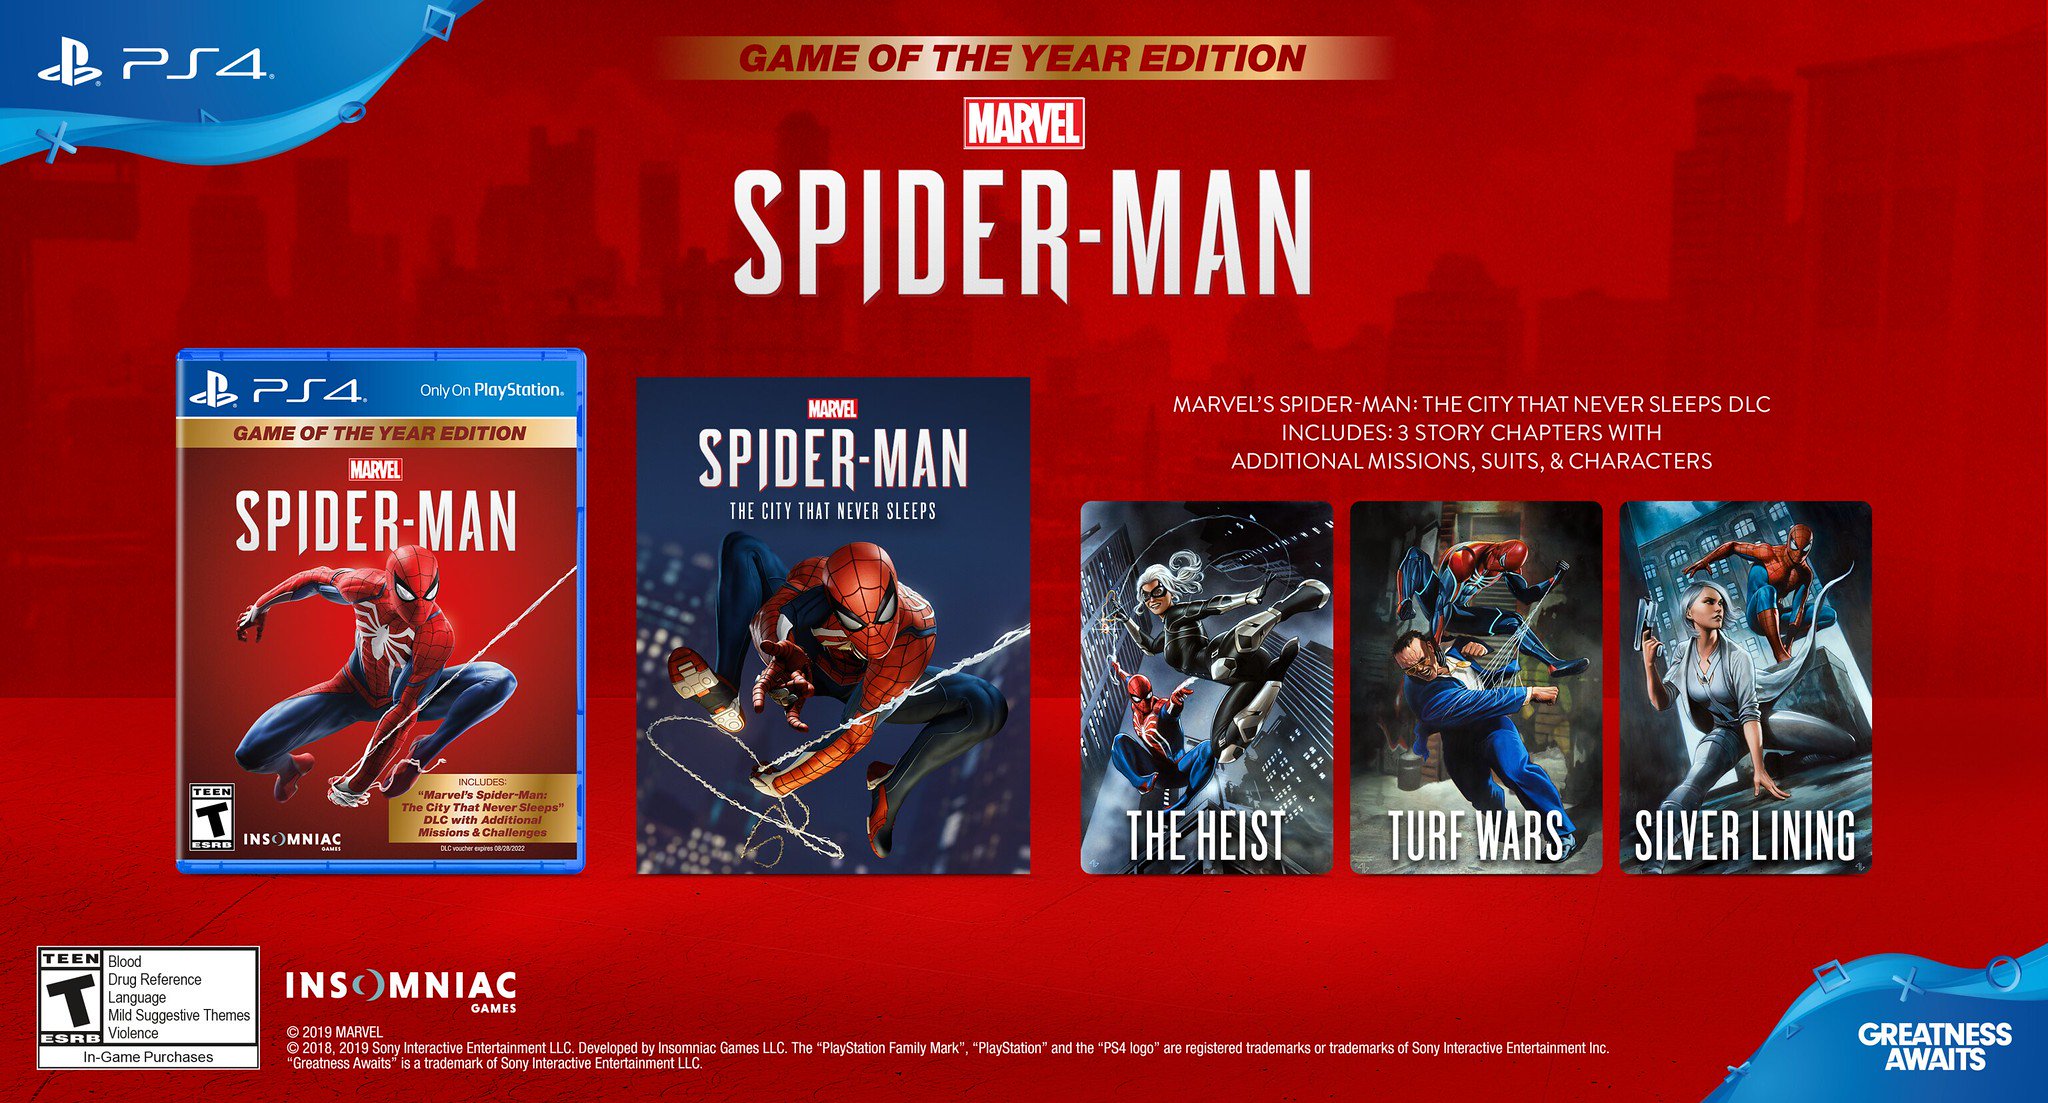 PlayStation on Twitter: "Marvel's Spider-Man: Game of the Year Edition comes packed with the complete The City That Never Sleeps DLC story arc addition to the full game. Available for